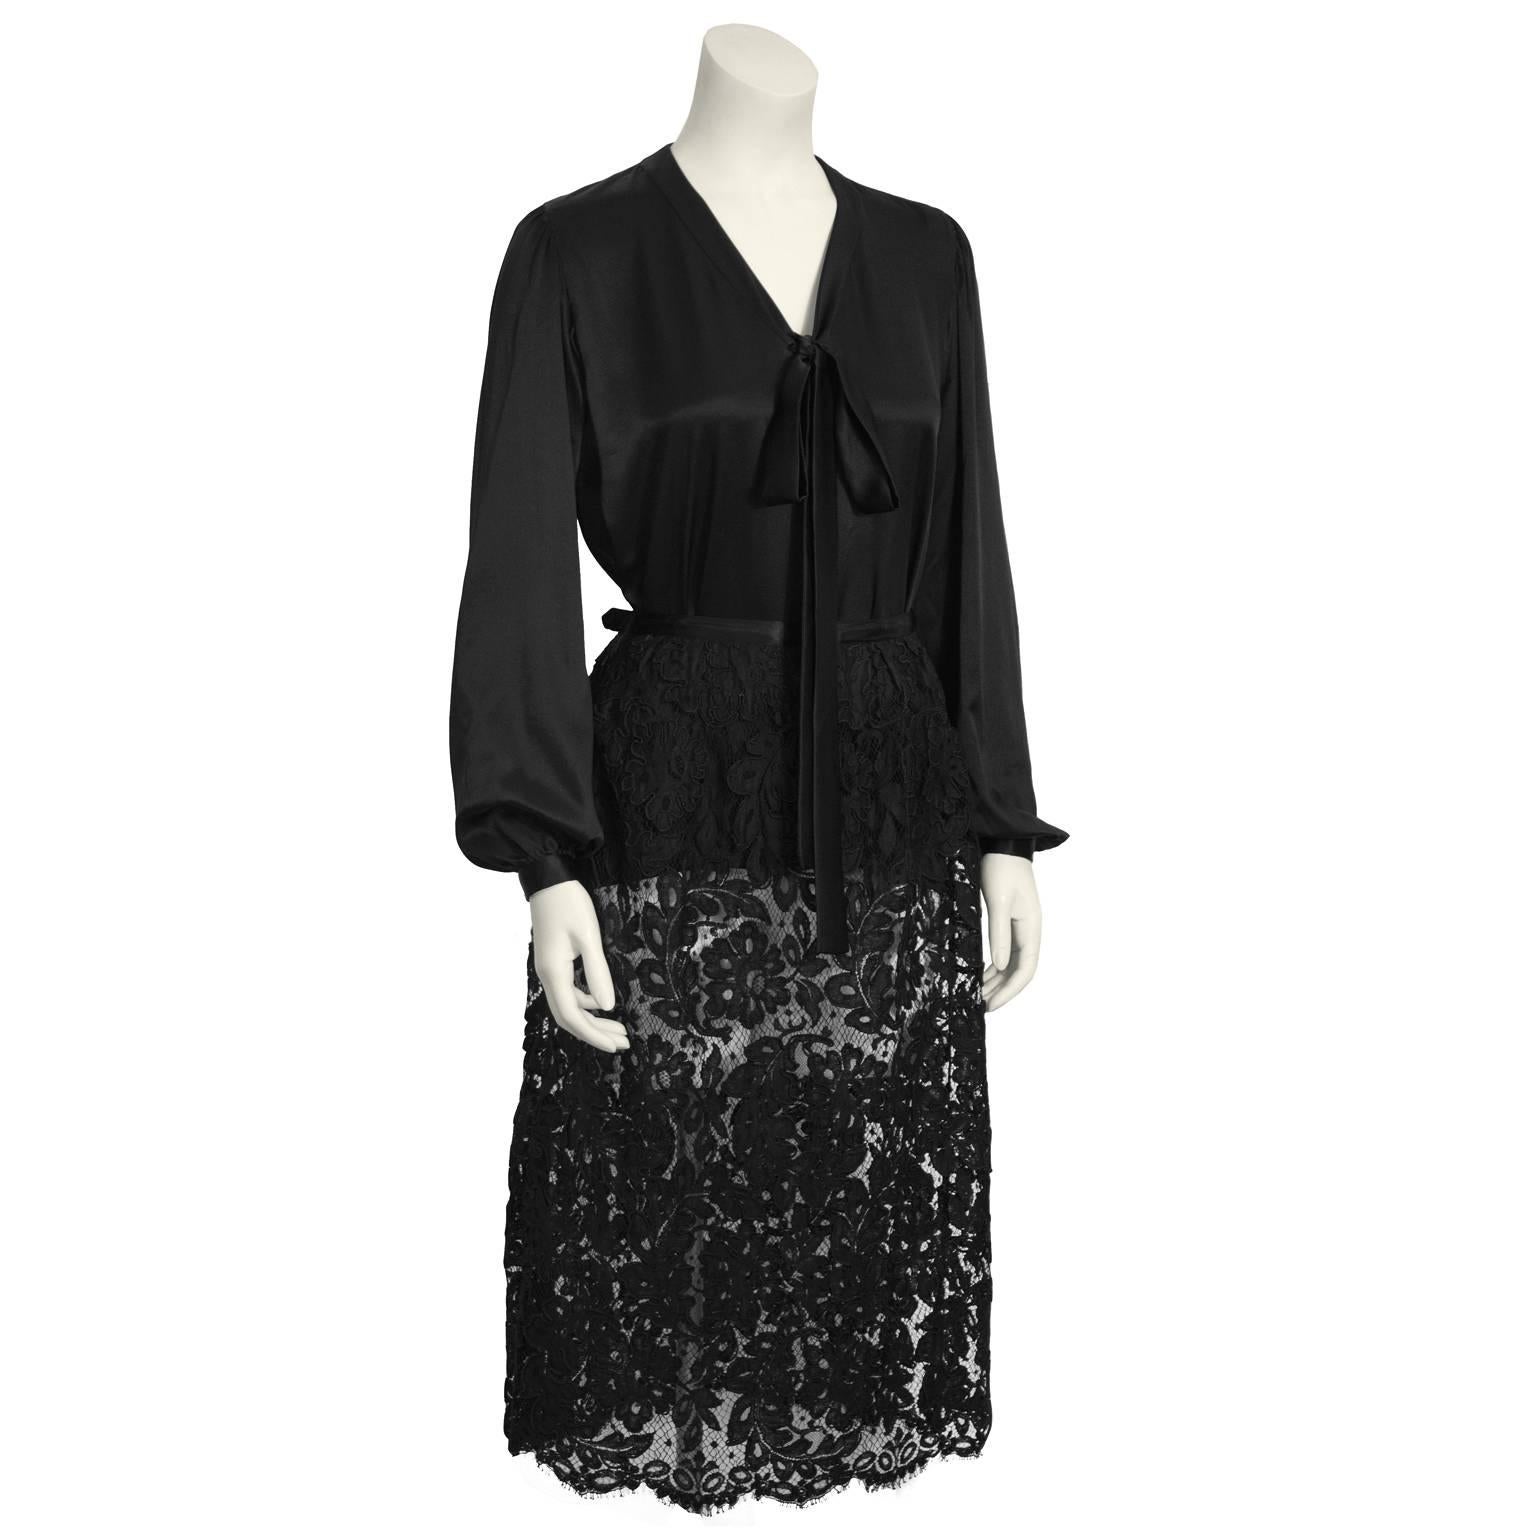 Classic Yves Saint Laurent duo from the 1970's features a black silk tie-neck blouse and a chic black guipure lace skirt.  Blouse is long sleeve with slight gathering at the shoulders and wrists. Cuffed wrists have single button. Mid length pencil